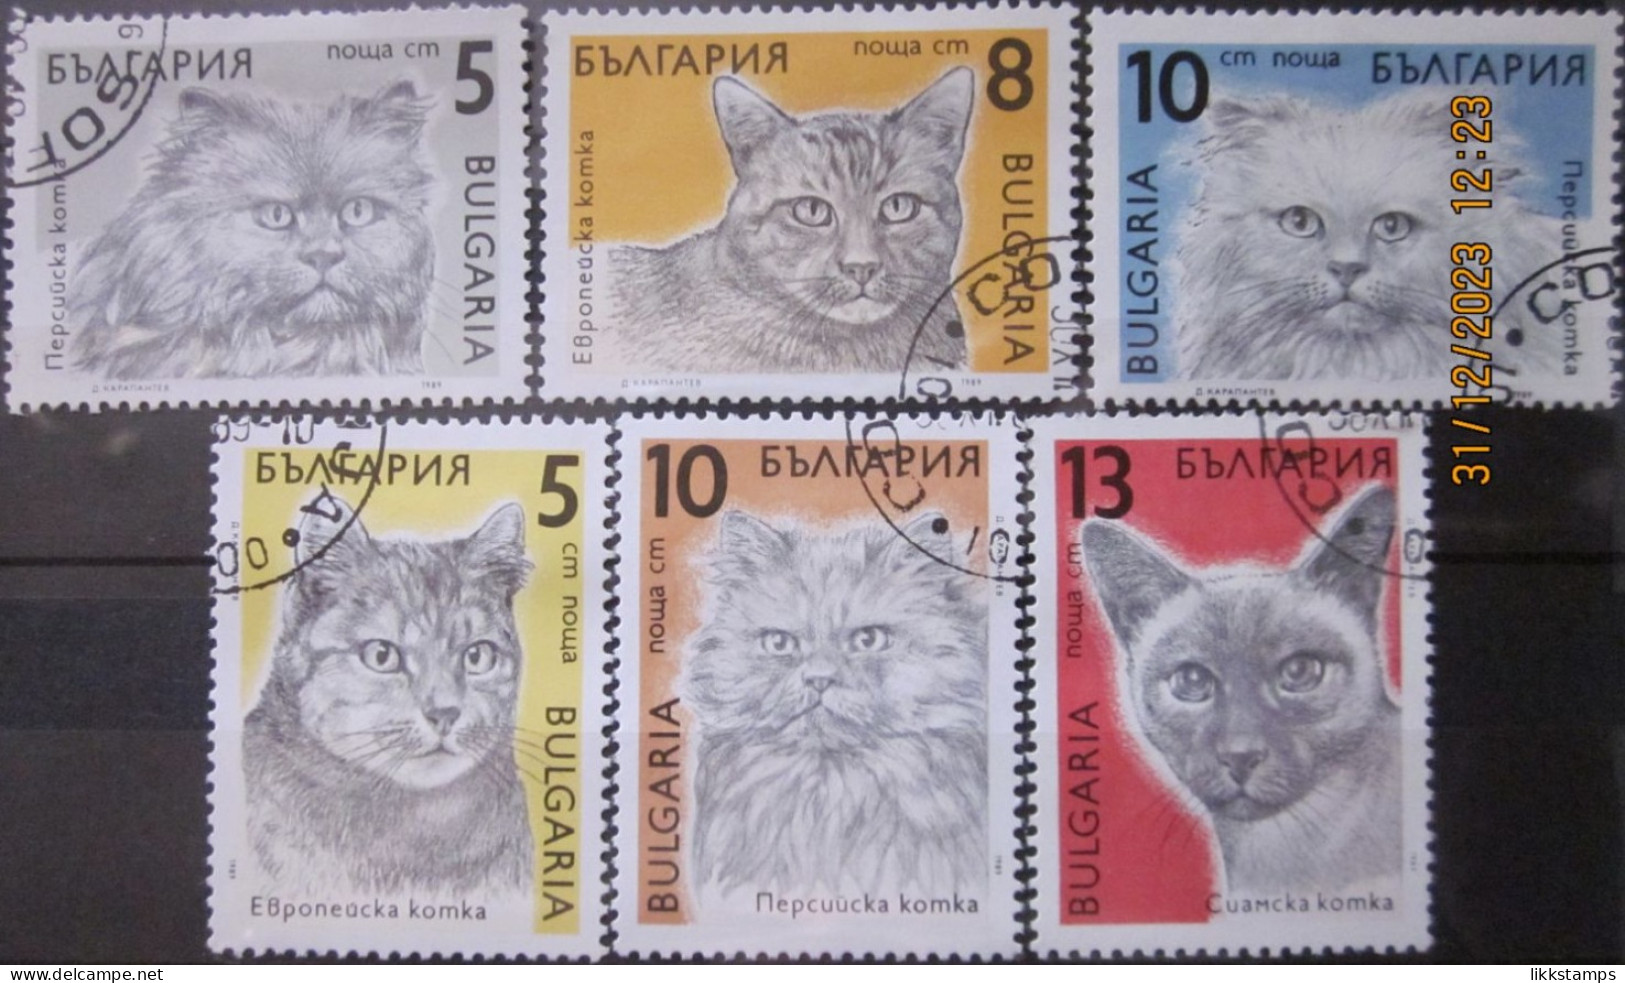 BULGARIA 1989 ~ S.G. 3658 - 3663, ~ CATS. ~  VFU #02906 - Used Stamps